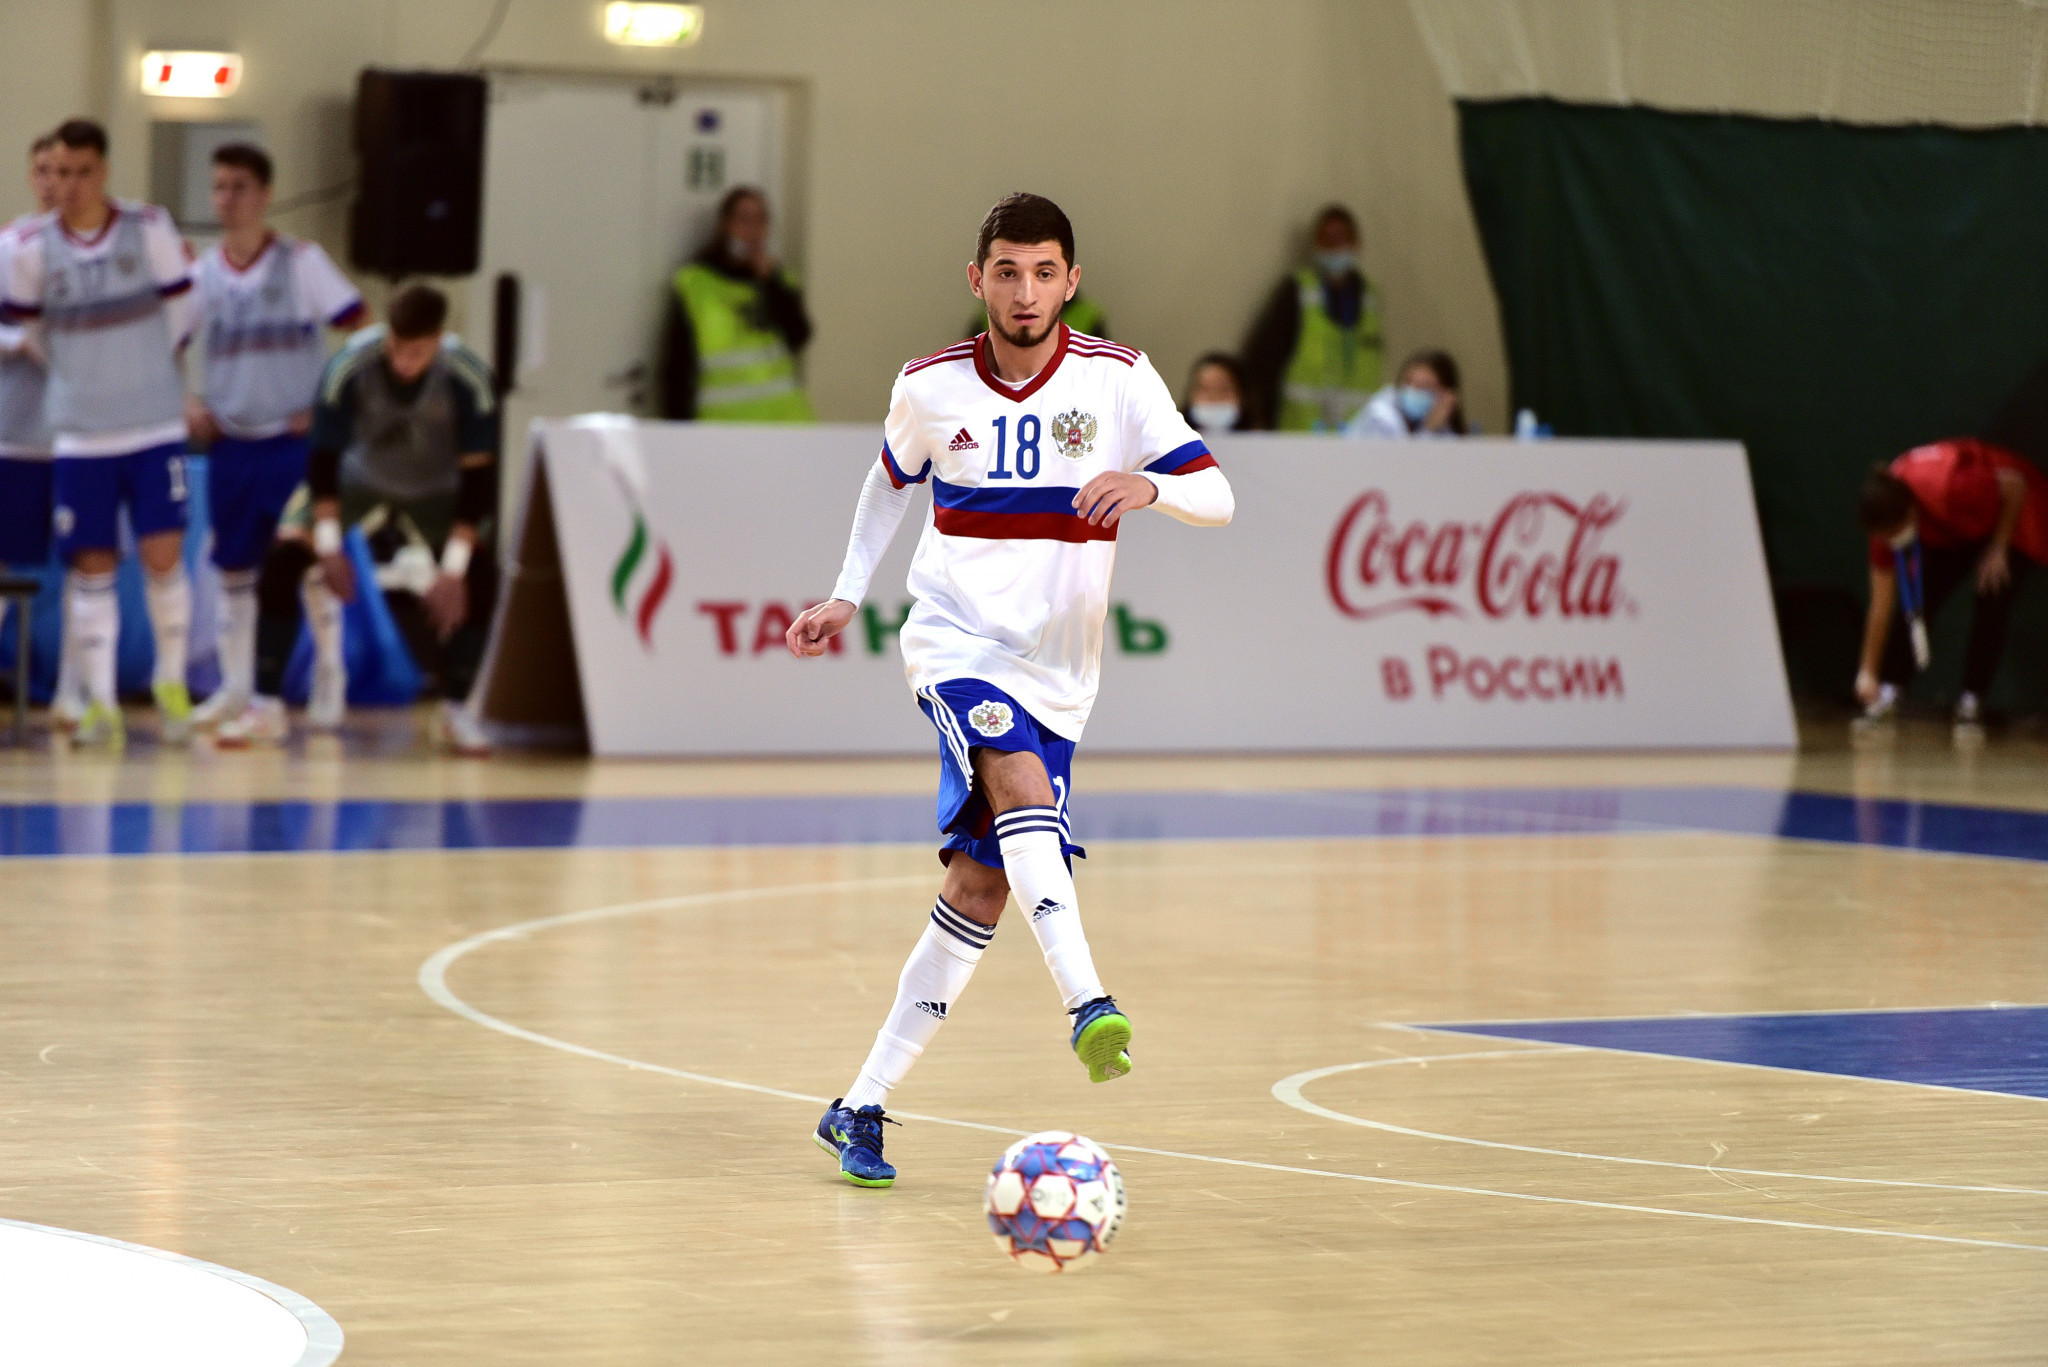 After getting underway, futsal medals will be determined on the final week of action at the Games of the CIS Countries ©Games of the CIS Countries